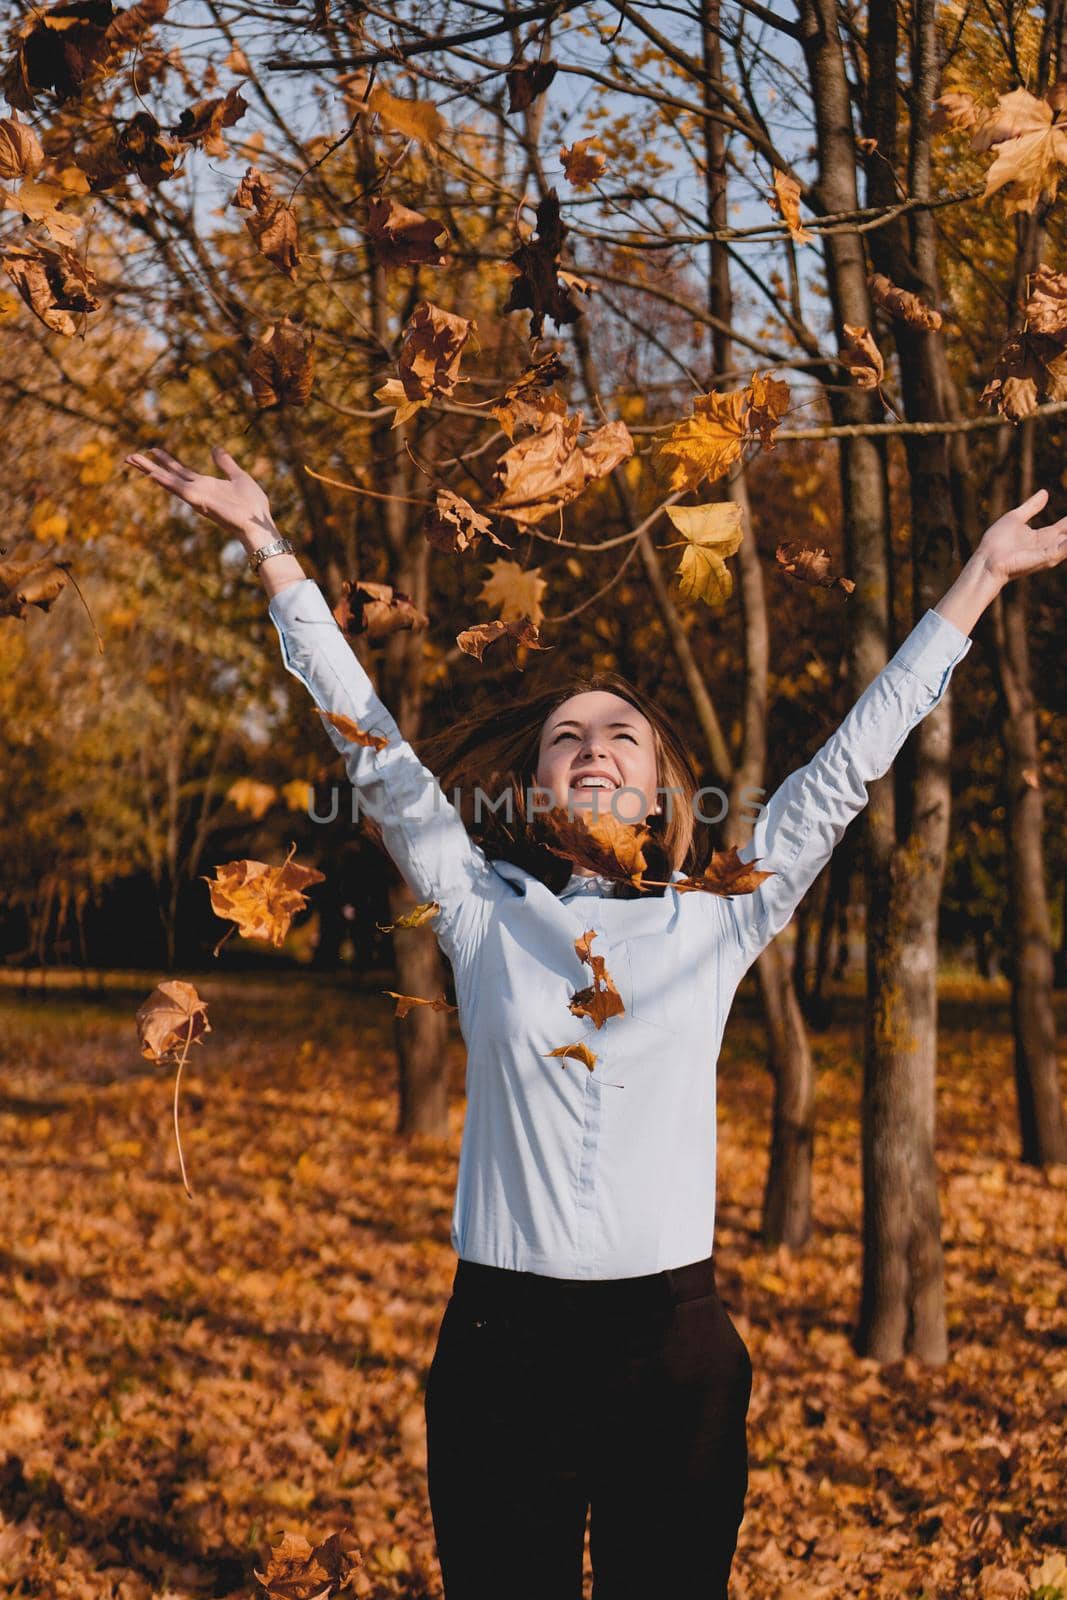 Woman throwing yellow leaves in the air - autumn park